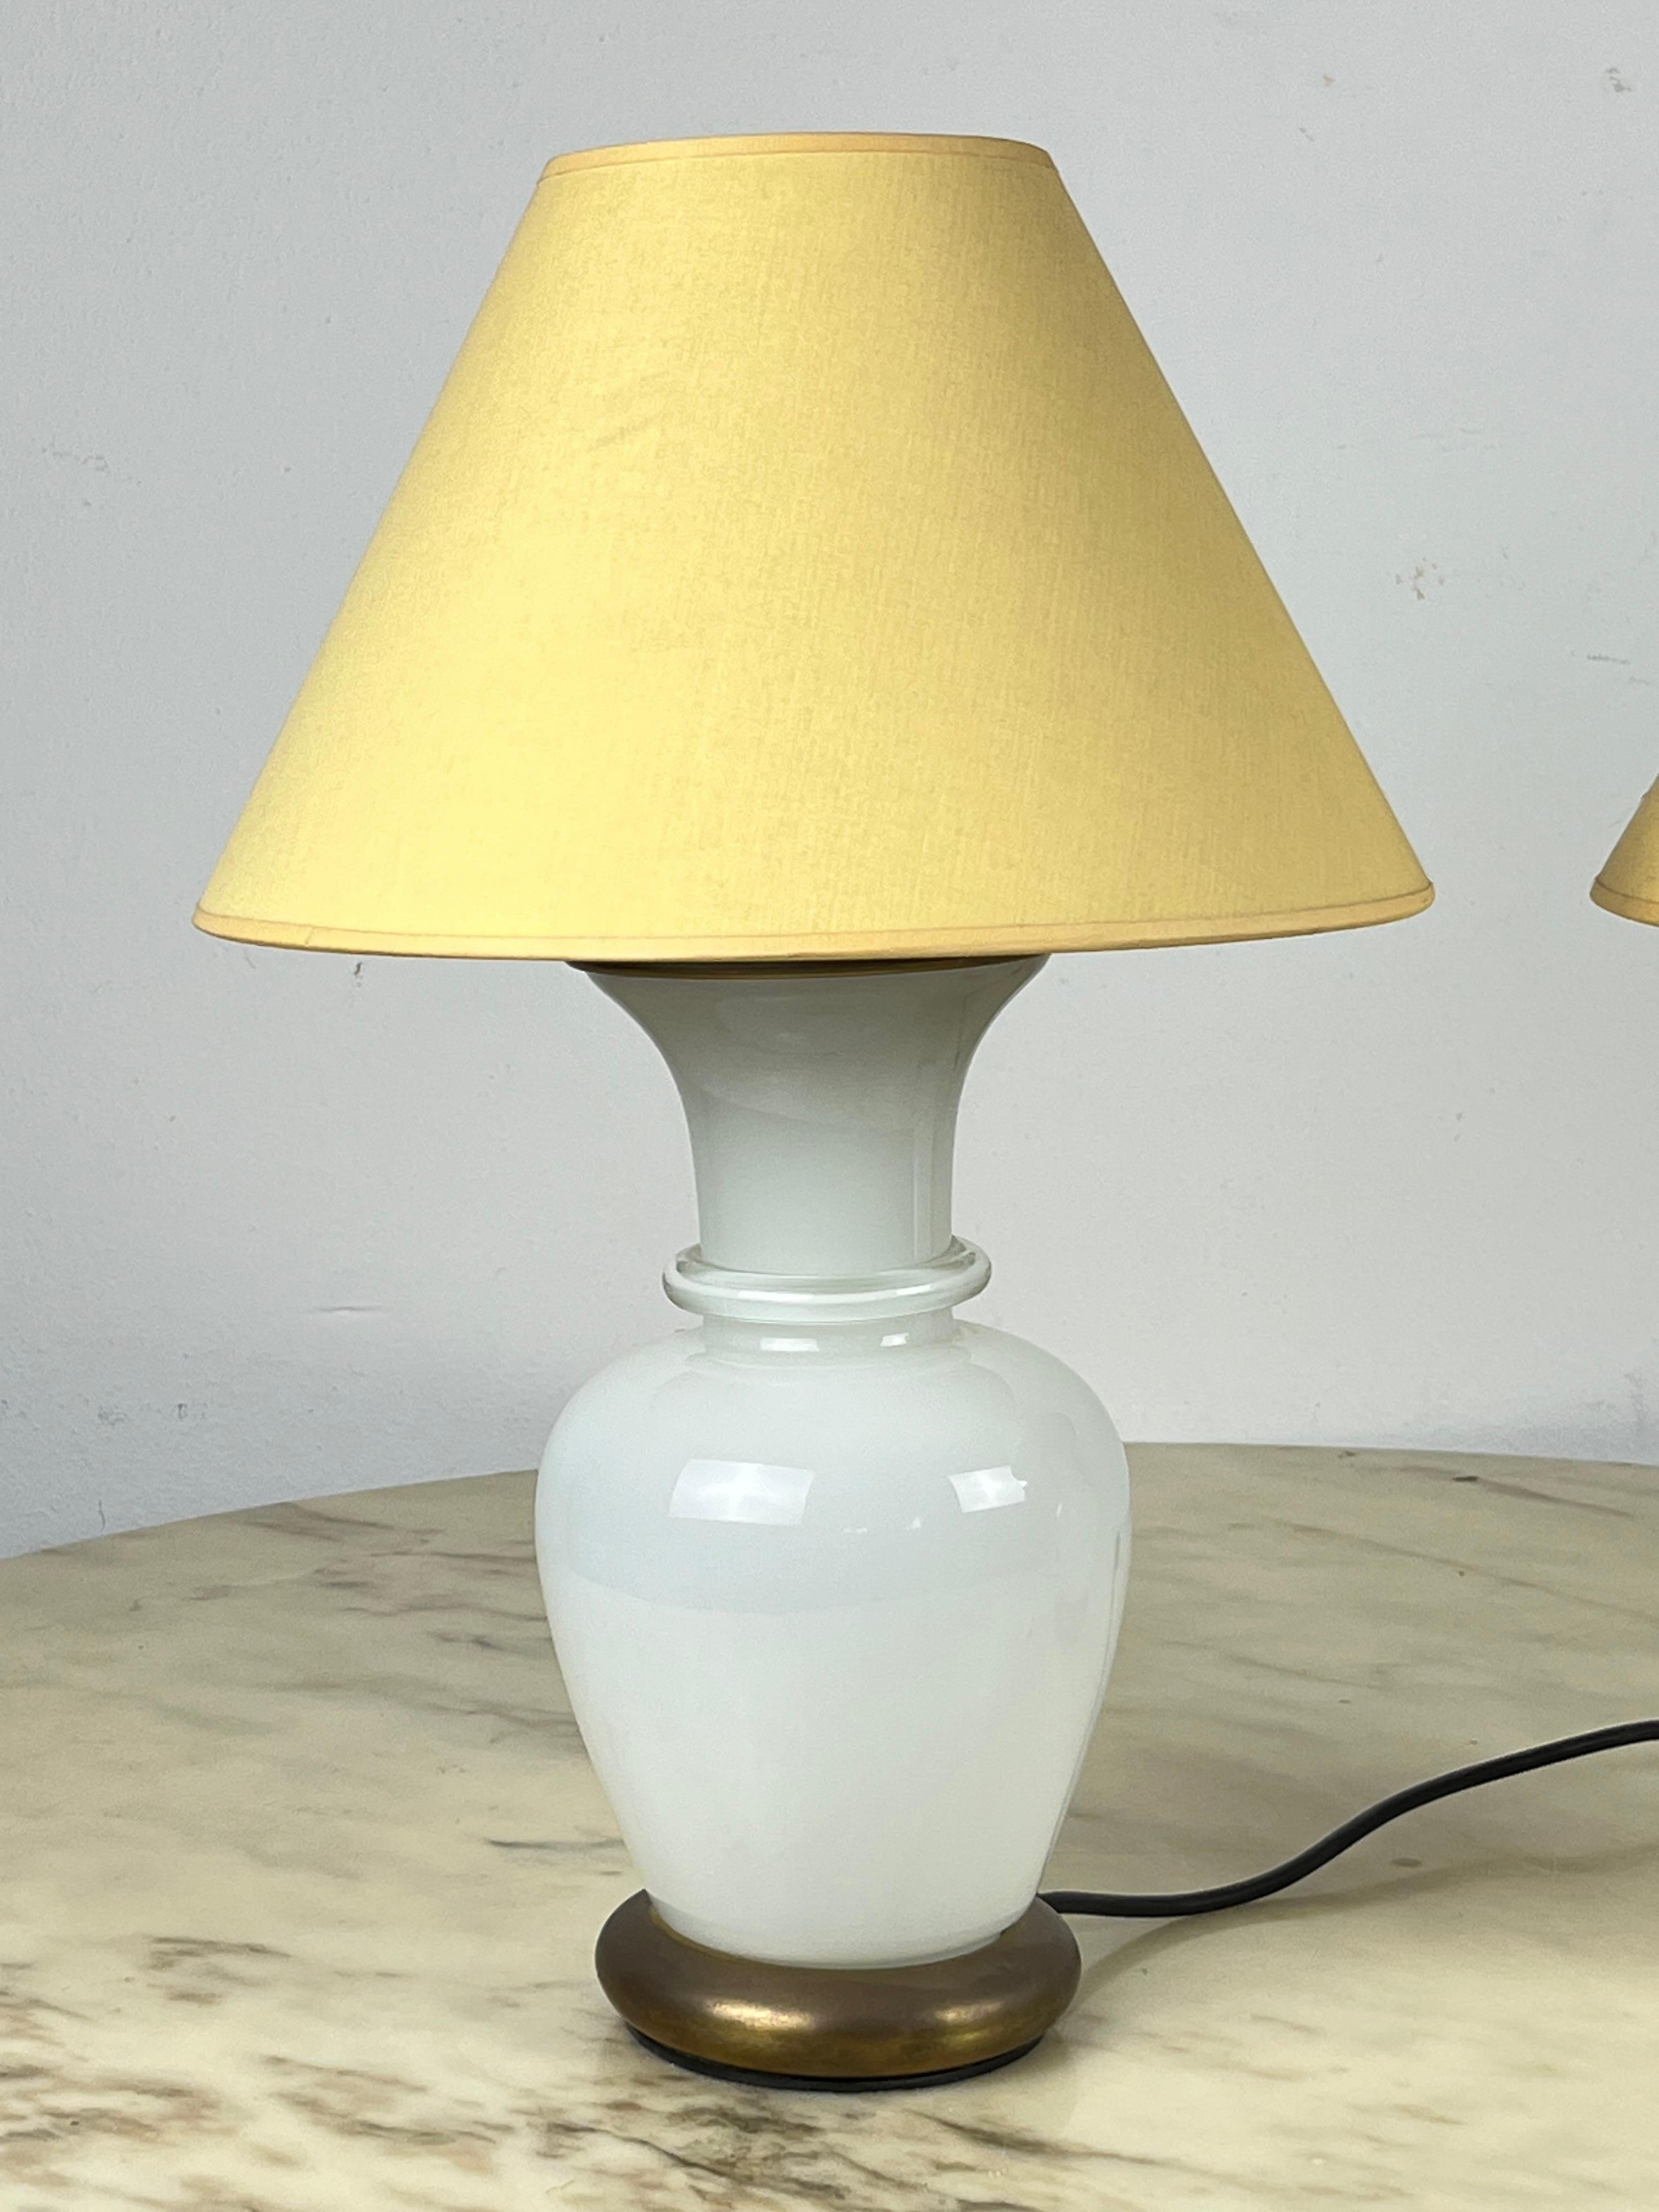 Set of 3 Murano Glass and Brass Table Lamps, F. Fabbian, Italy, 1970s For Sale 1